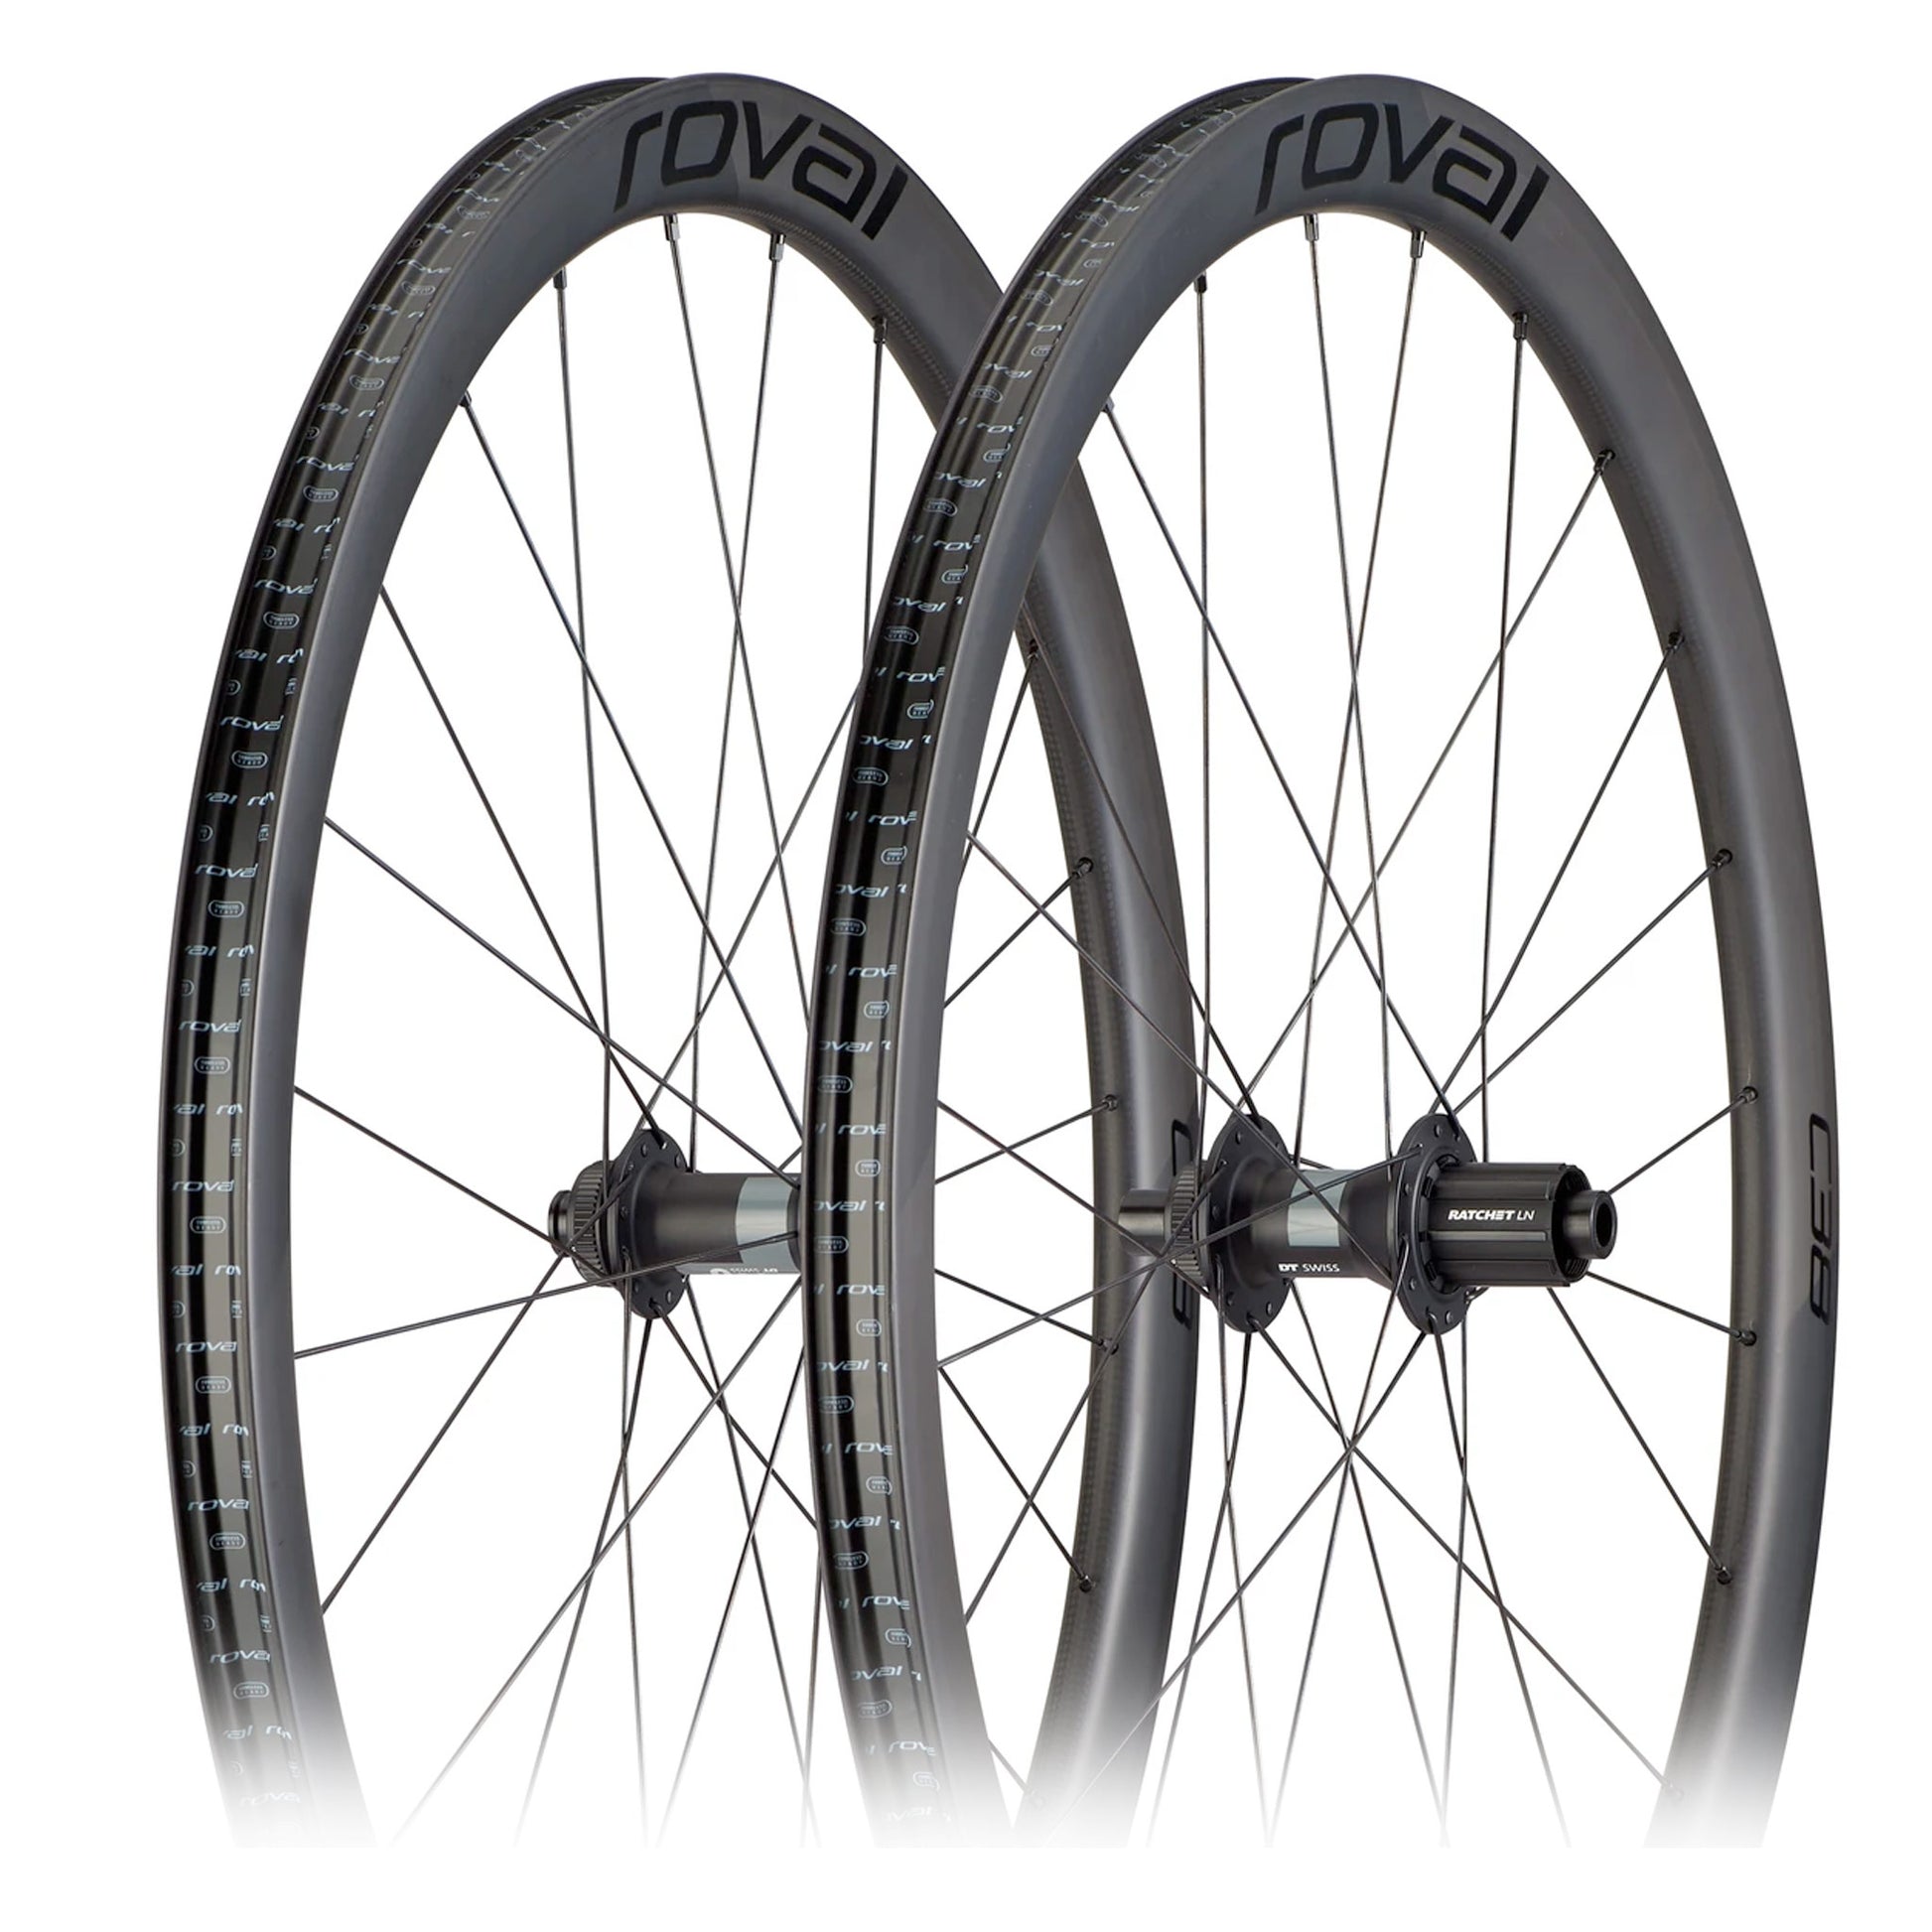 Roval Rapide C38 Carbon Disc Wheelset 700c buy online at Woolys Wheels with free delivery